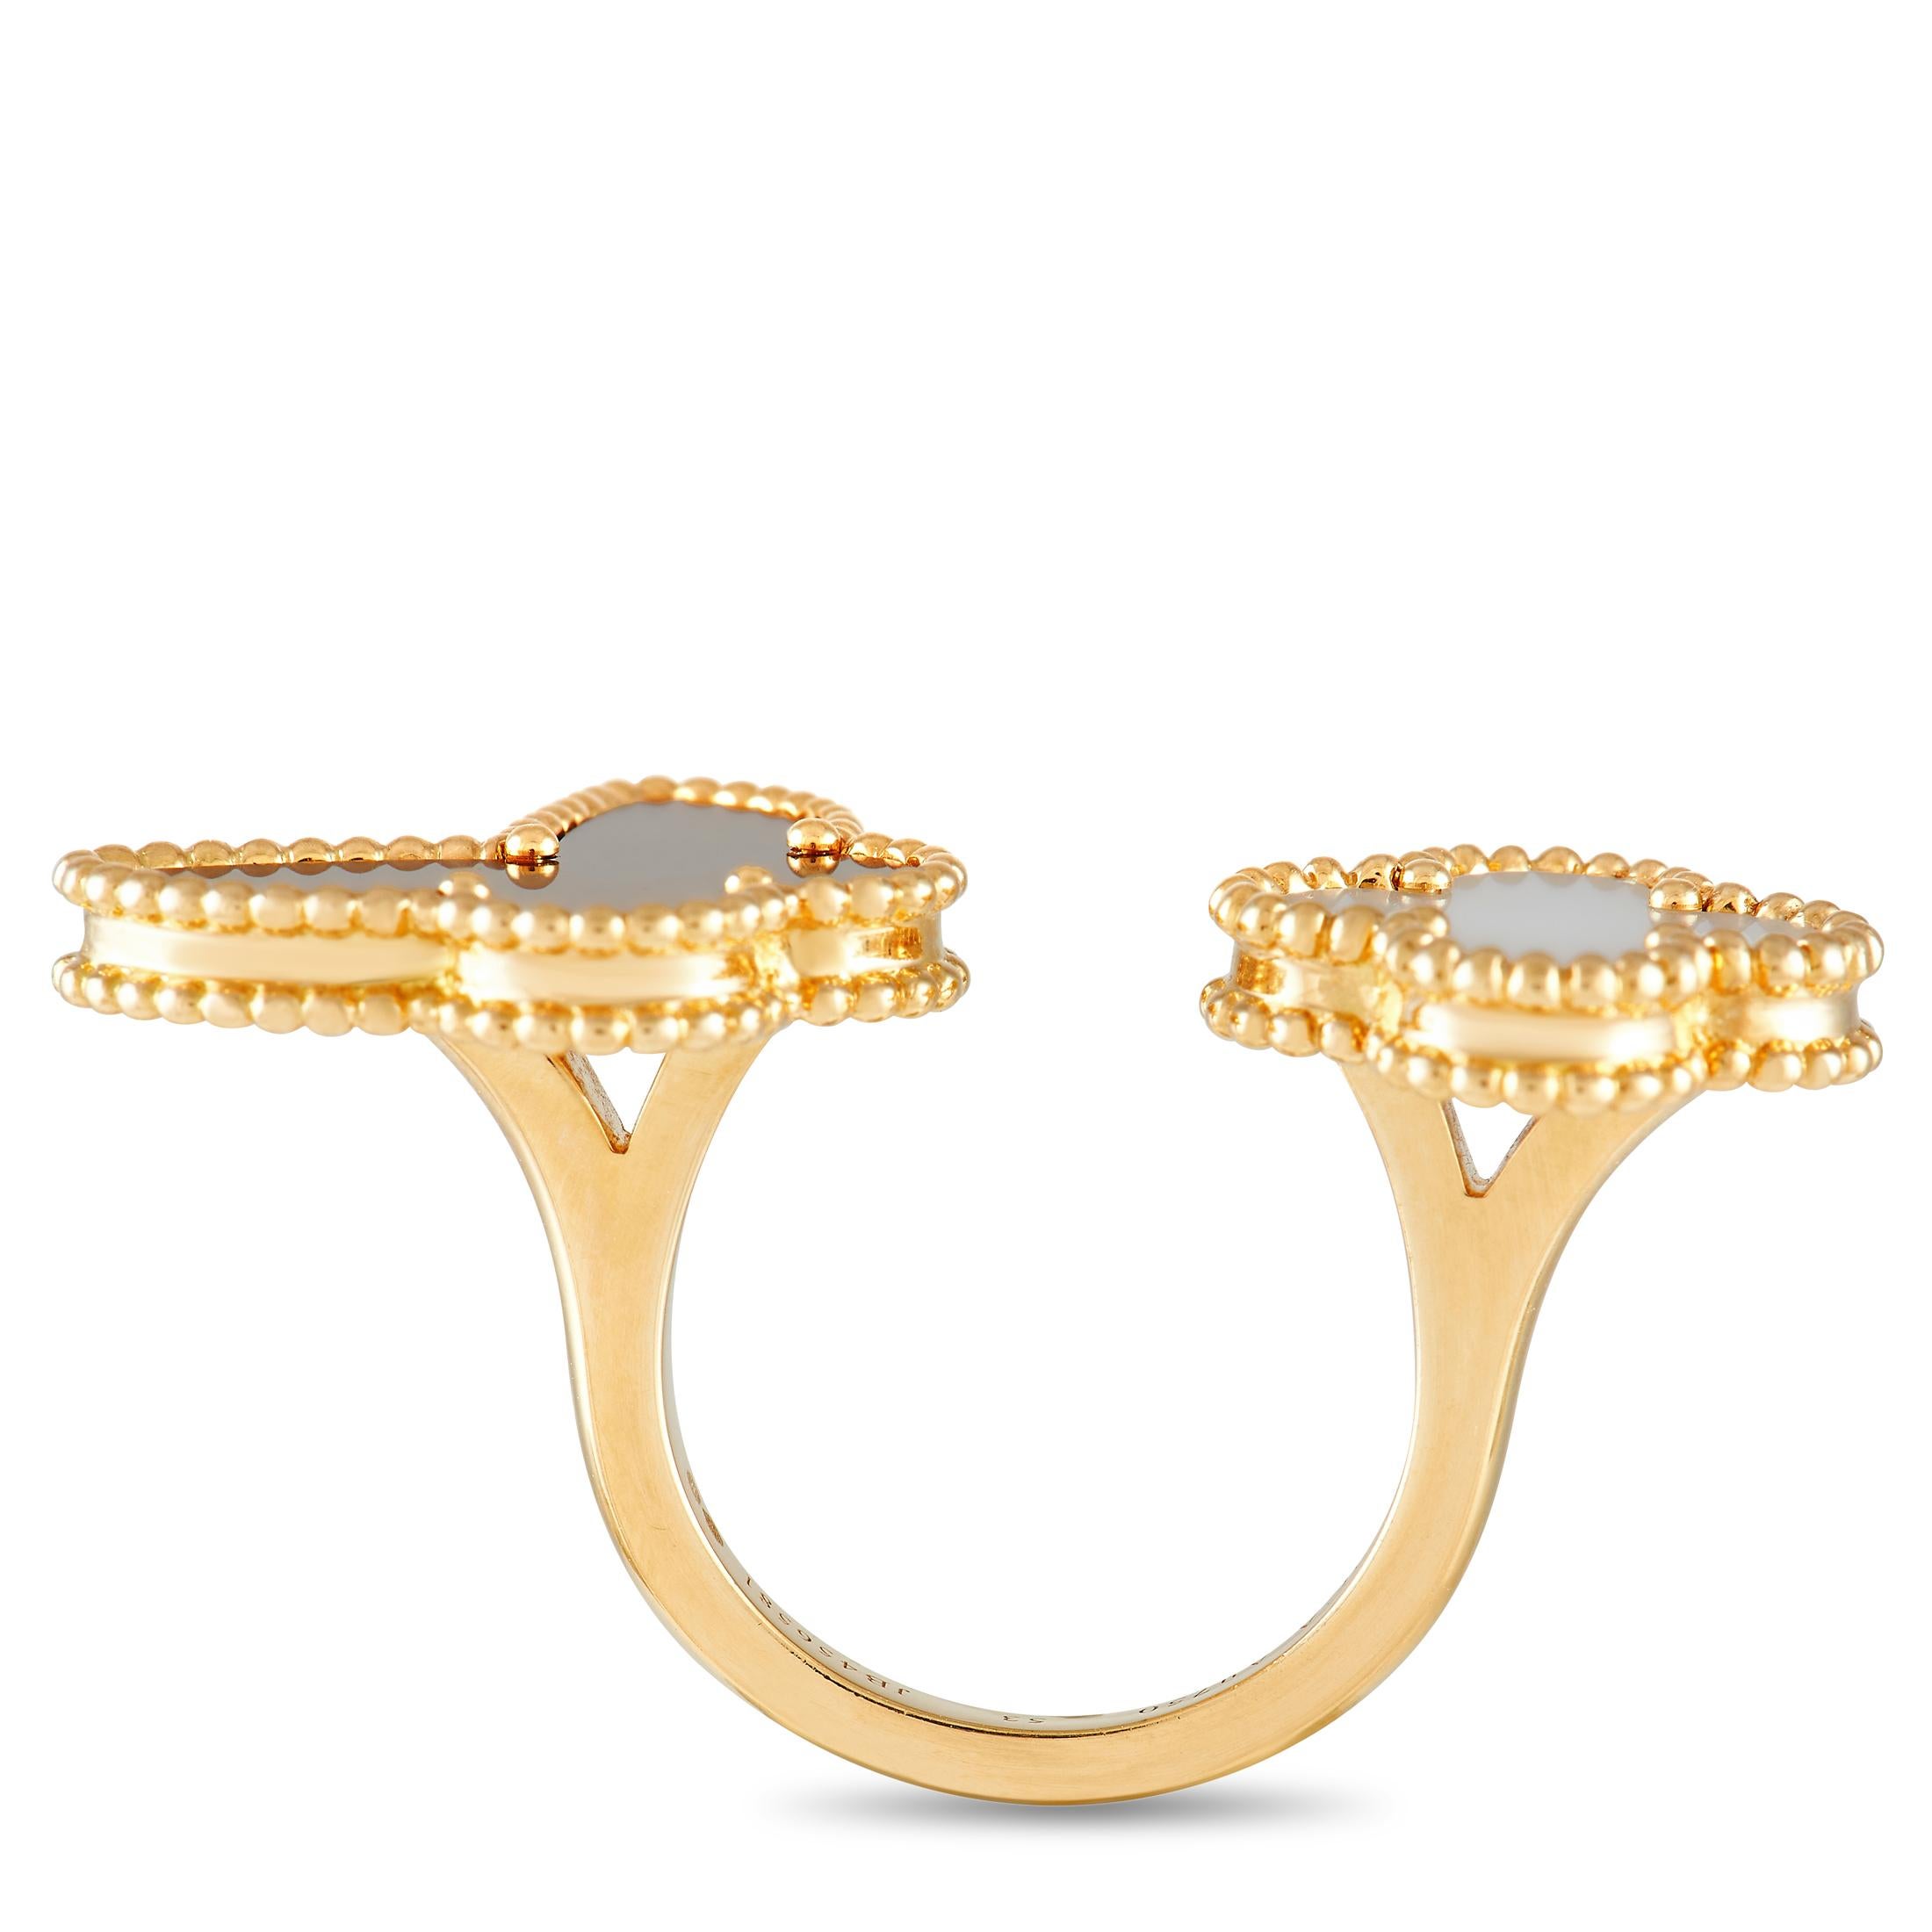 This Van Cleef & Arpels Lucky Alhambra between finger ring will serve as a dramatic addition to any luxury jewelry collection. On one end of the 18K Yellow Gold setting, you’ll find a minimalist butterfly motif accented by a captivating Tiger Eye